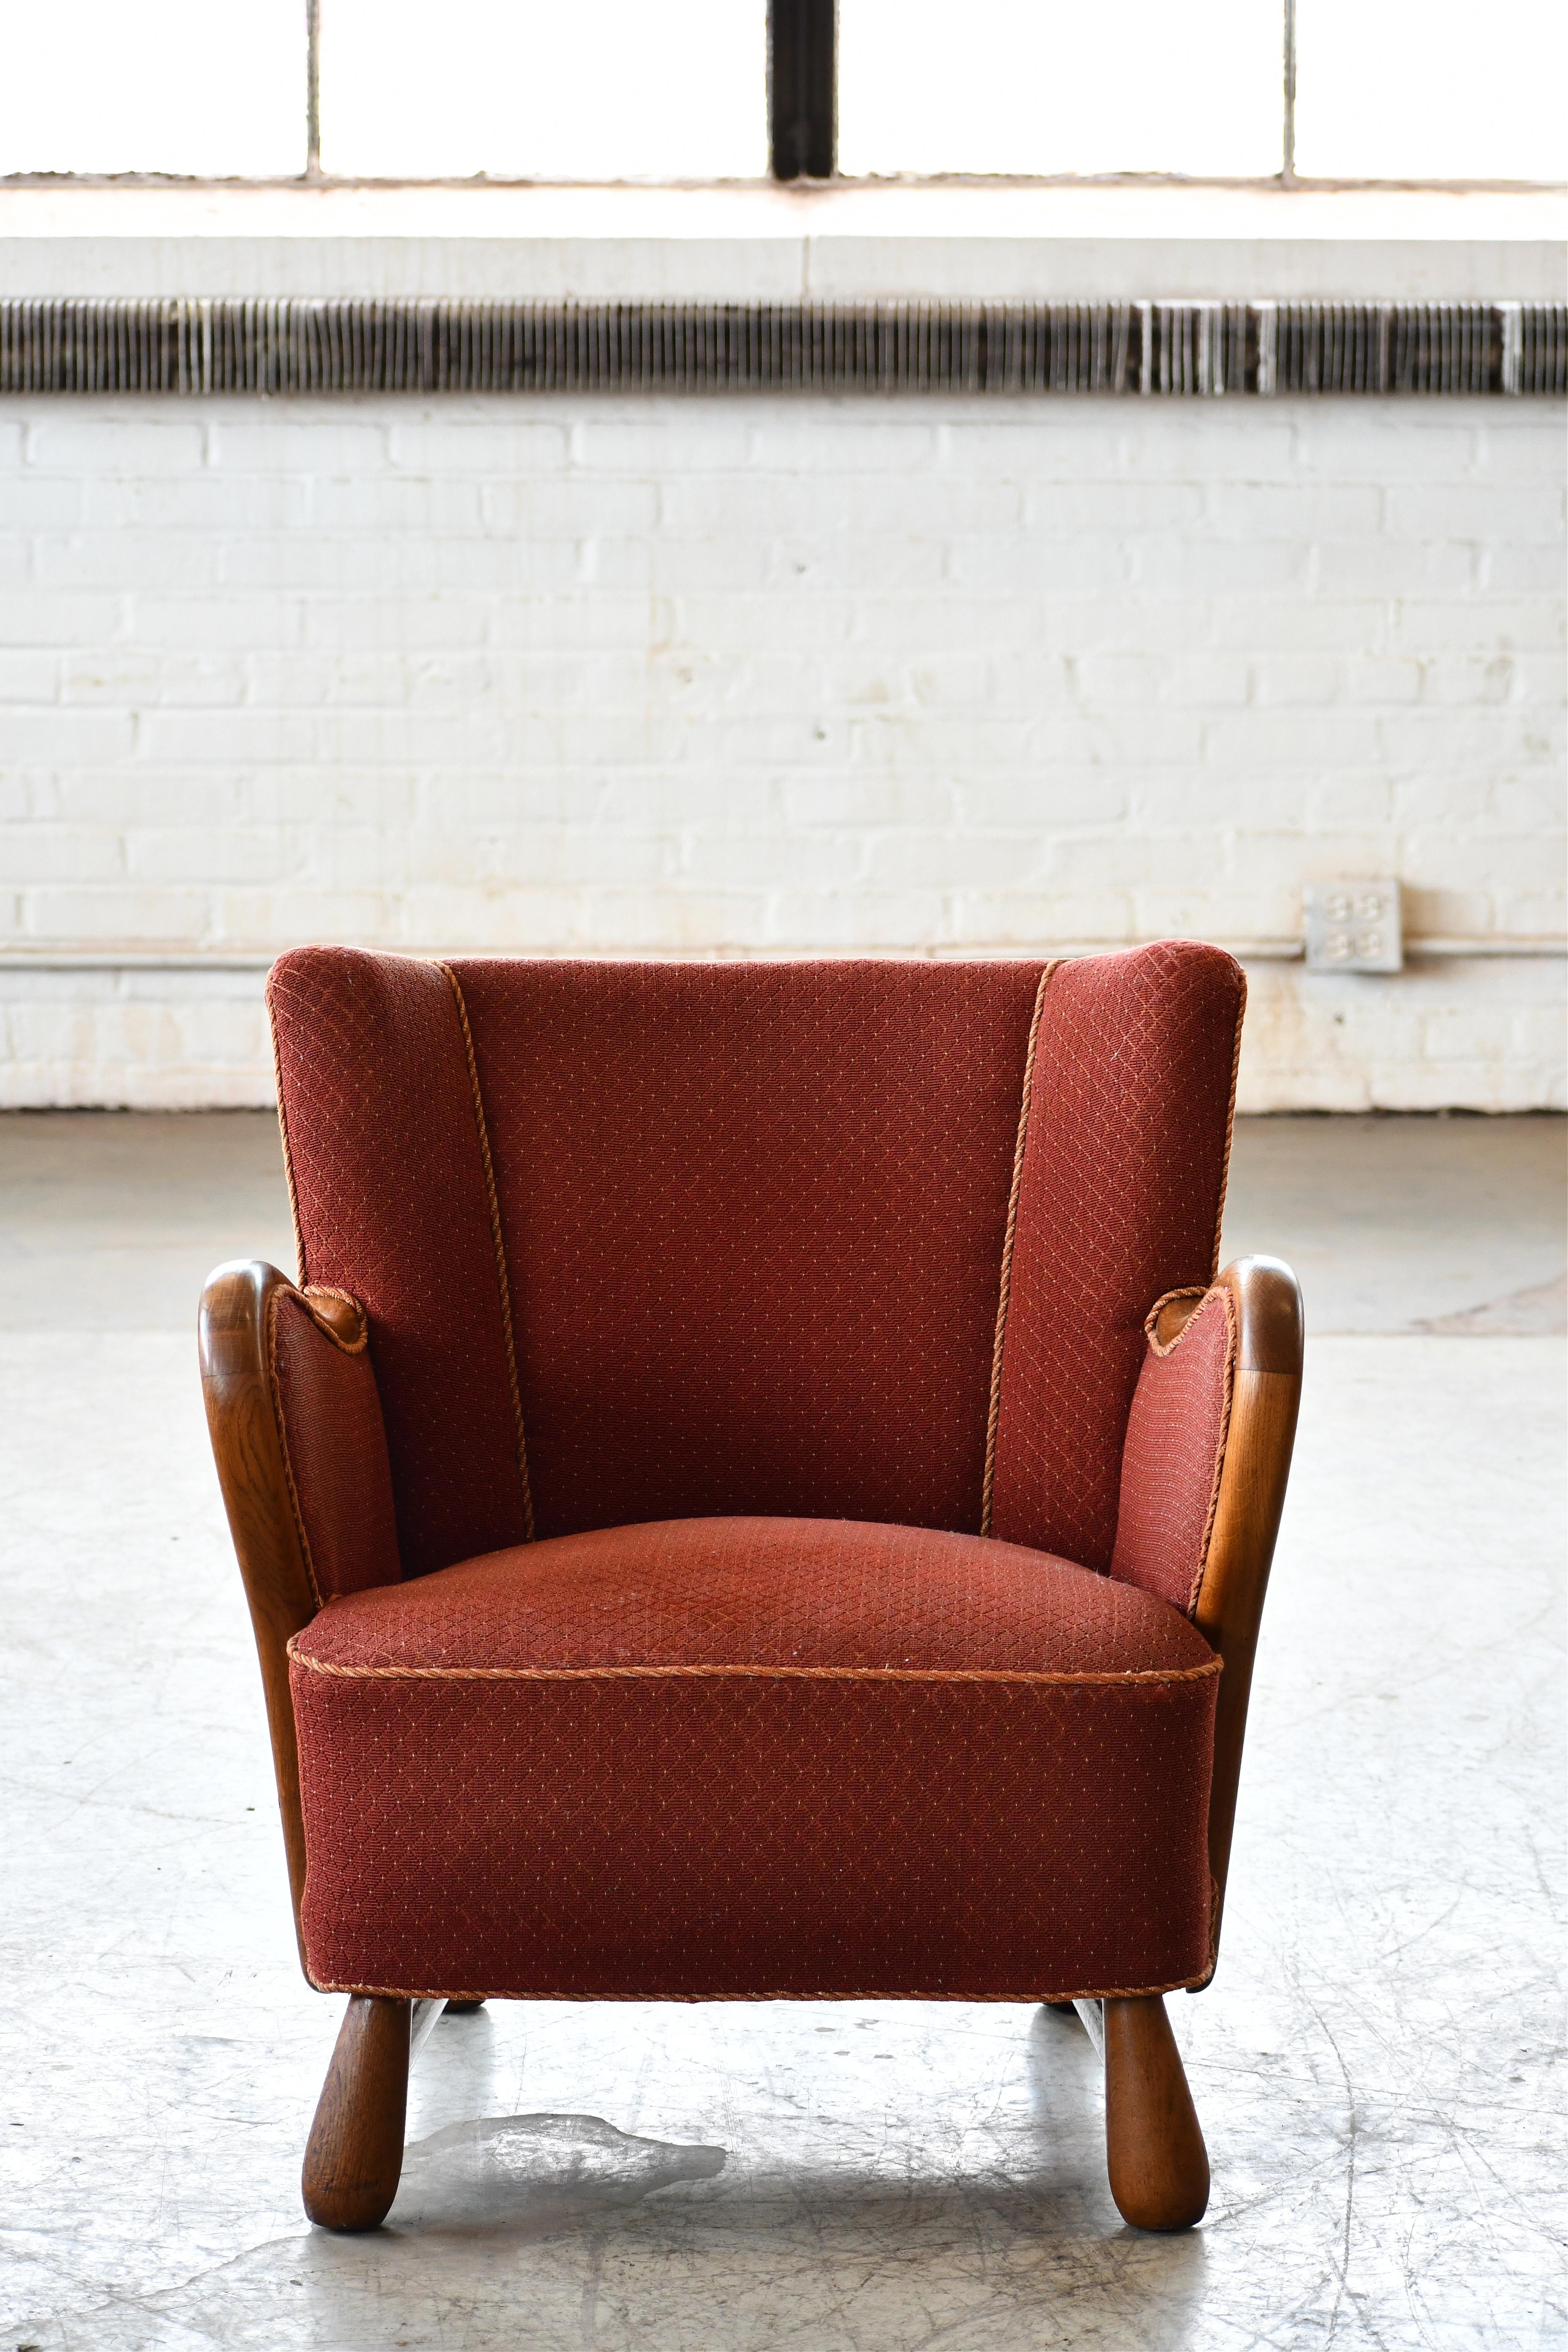 Mid-20th Century Rare Danish Easy Lounge Chair in Mahogany Attributed to Otto Færge, 1940's For Sale